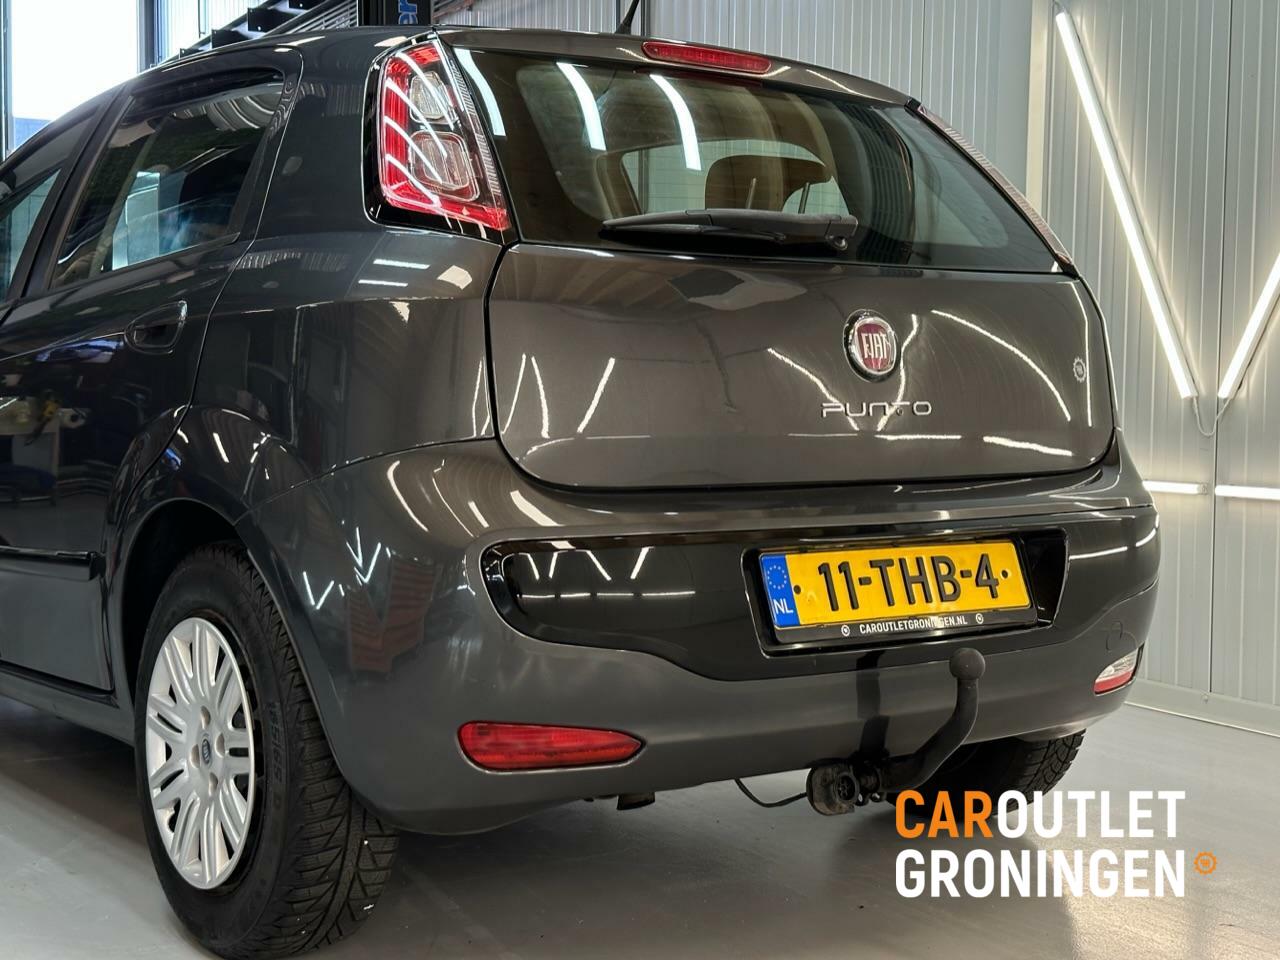 Caroutlet Groningen - Fiat Punto Evo 1.3 M-Jet Mylife | 5 DRS | AIRCO | CRUISE CONTROL